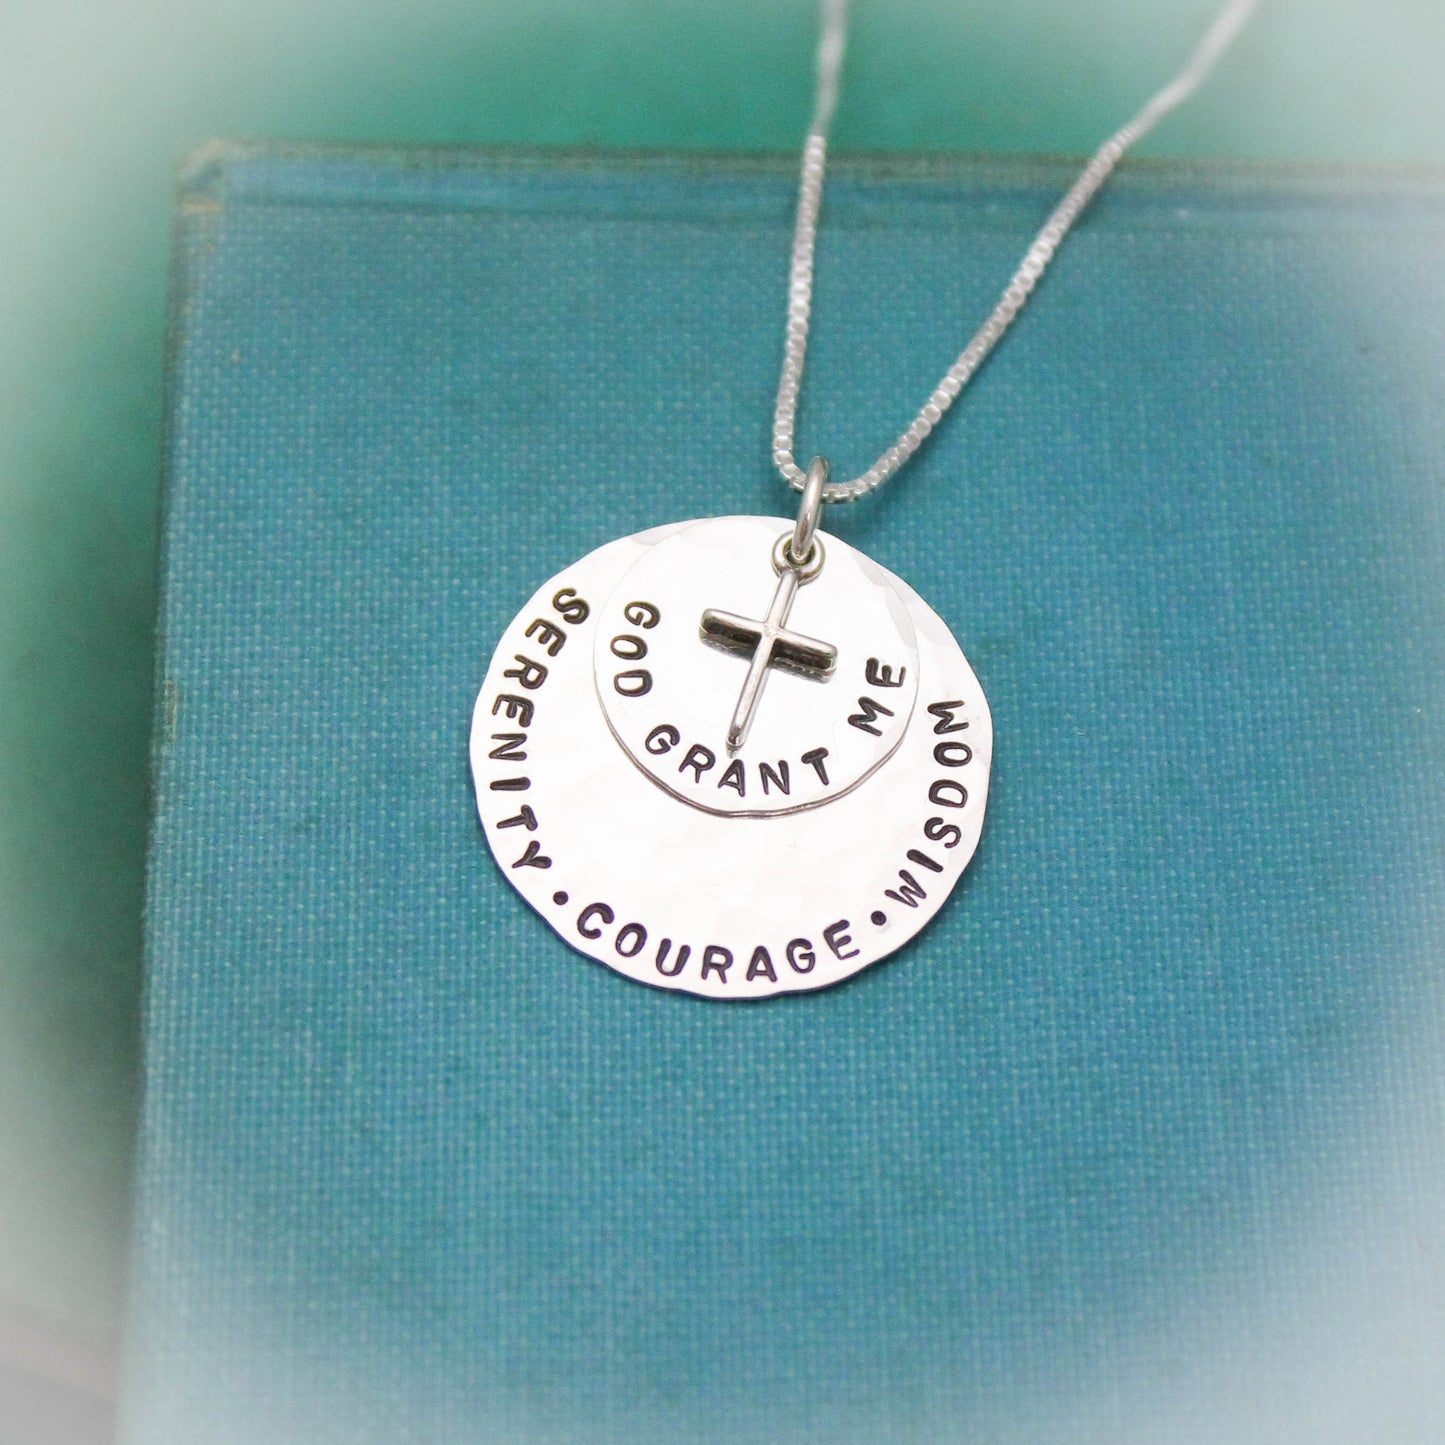 Serenity Prayer Pendant Necklace in Sterling Silver with Cross Charm  Personalized Hand Stamped Jewelry